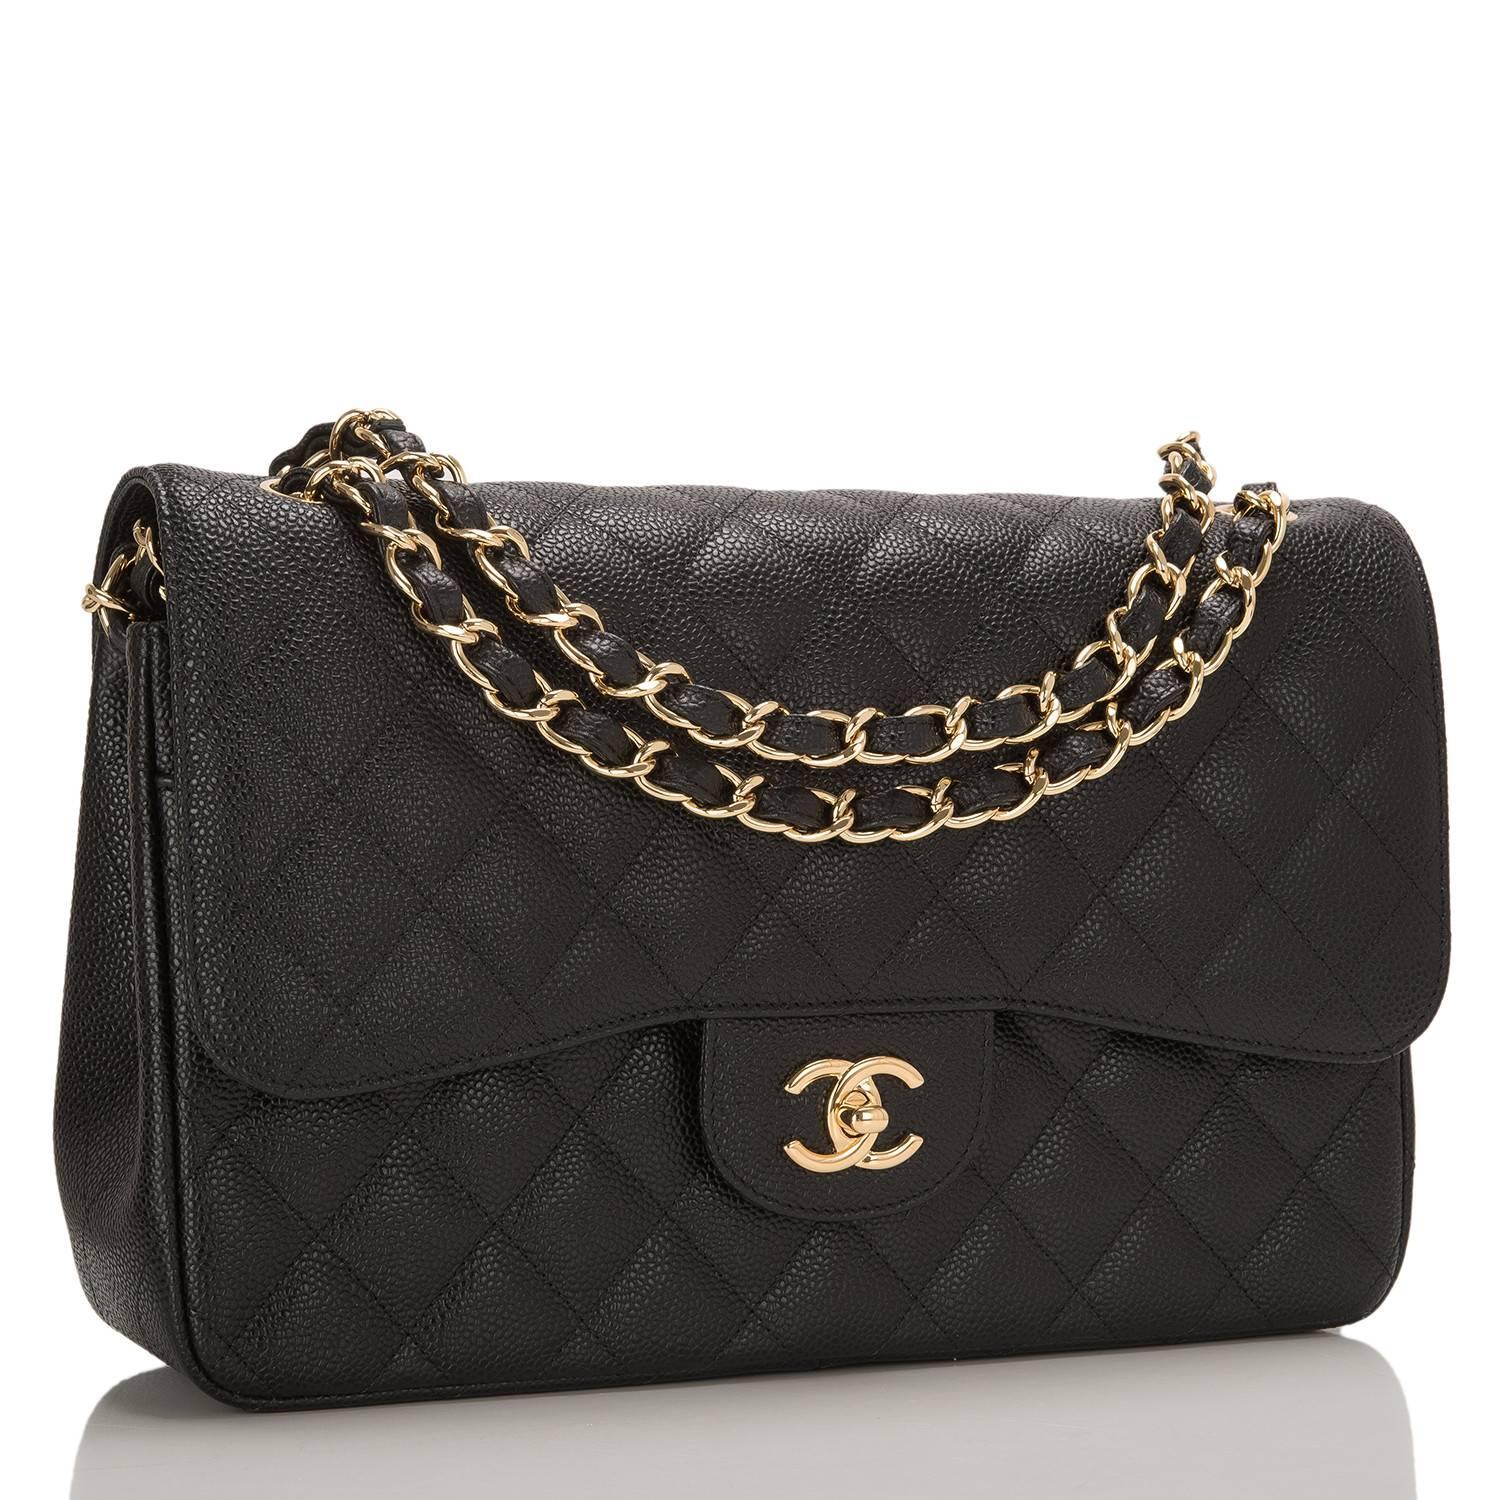 Chanel Jumbo Classic double flap bag of black quilted caviar leather with gold tone hardware.

This bag features a front flap with signature CC turnlock closure, a half moon back pocket, and an adjustable interwoven gold tone chain link with black